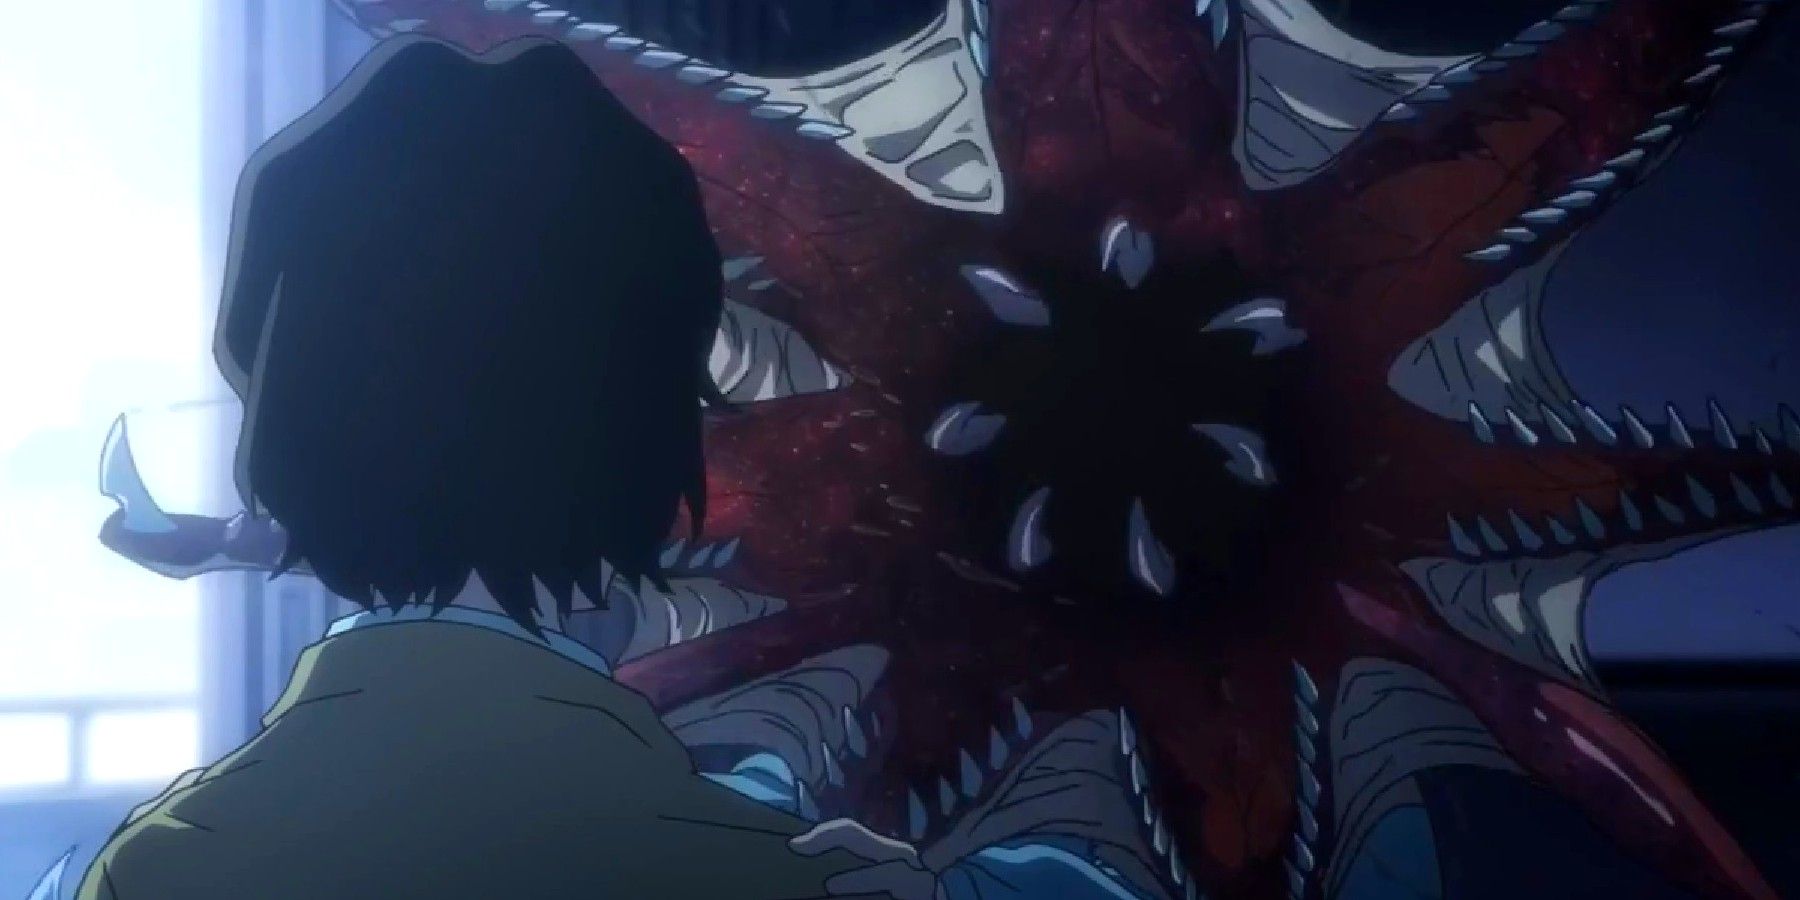 a grotesque monster opens its mouth and attacks a person in this anime